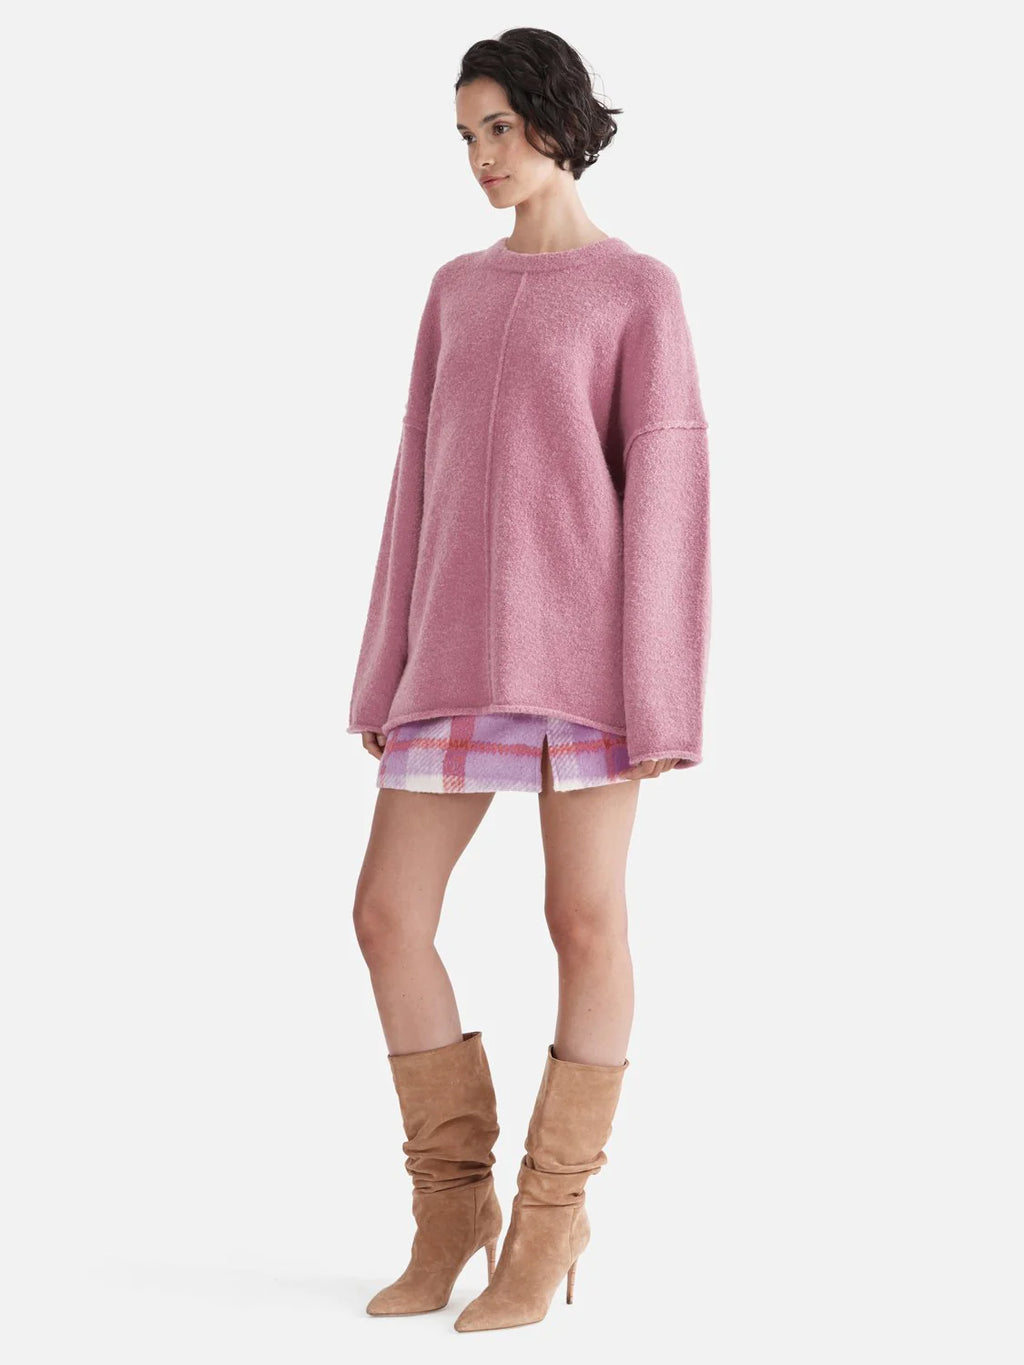 ENA PELLY - Amira Boucle Knit Top - Orchid